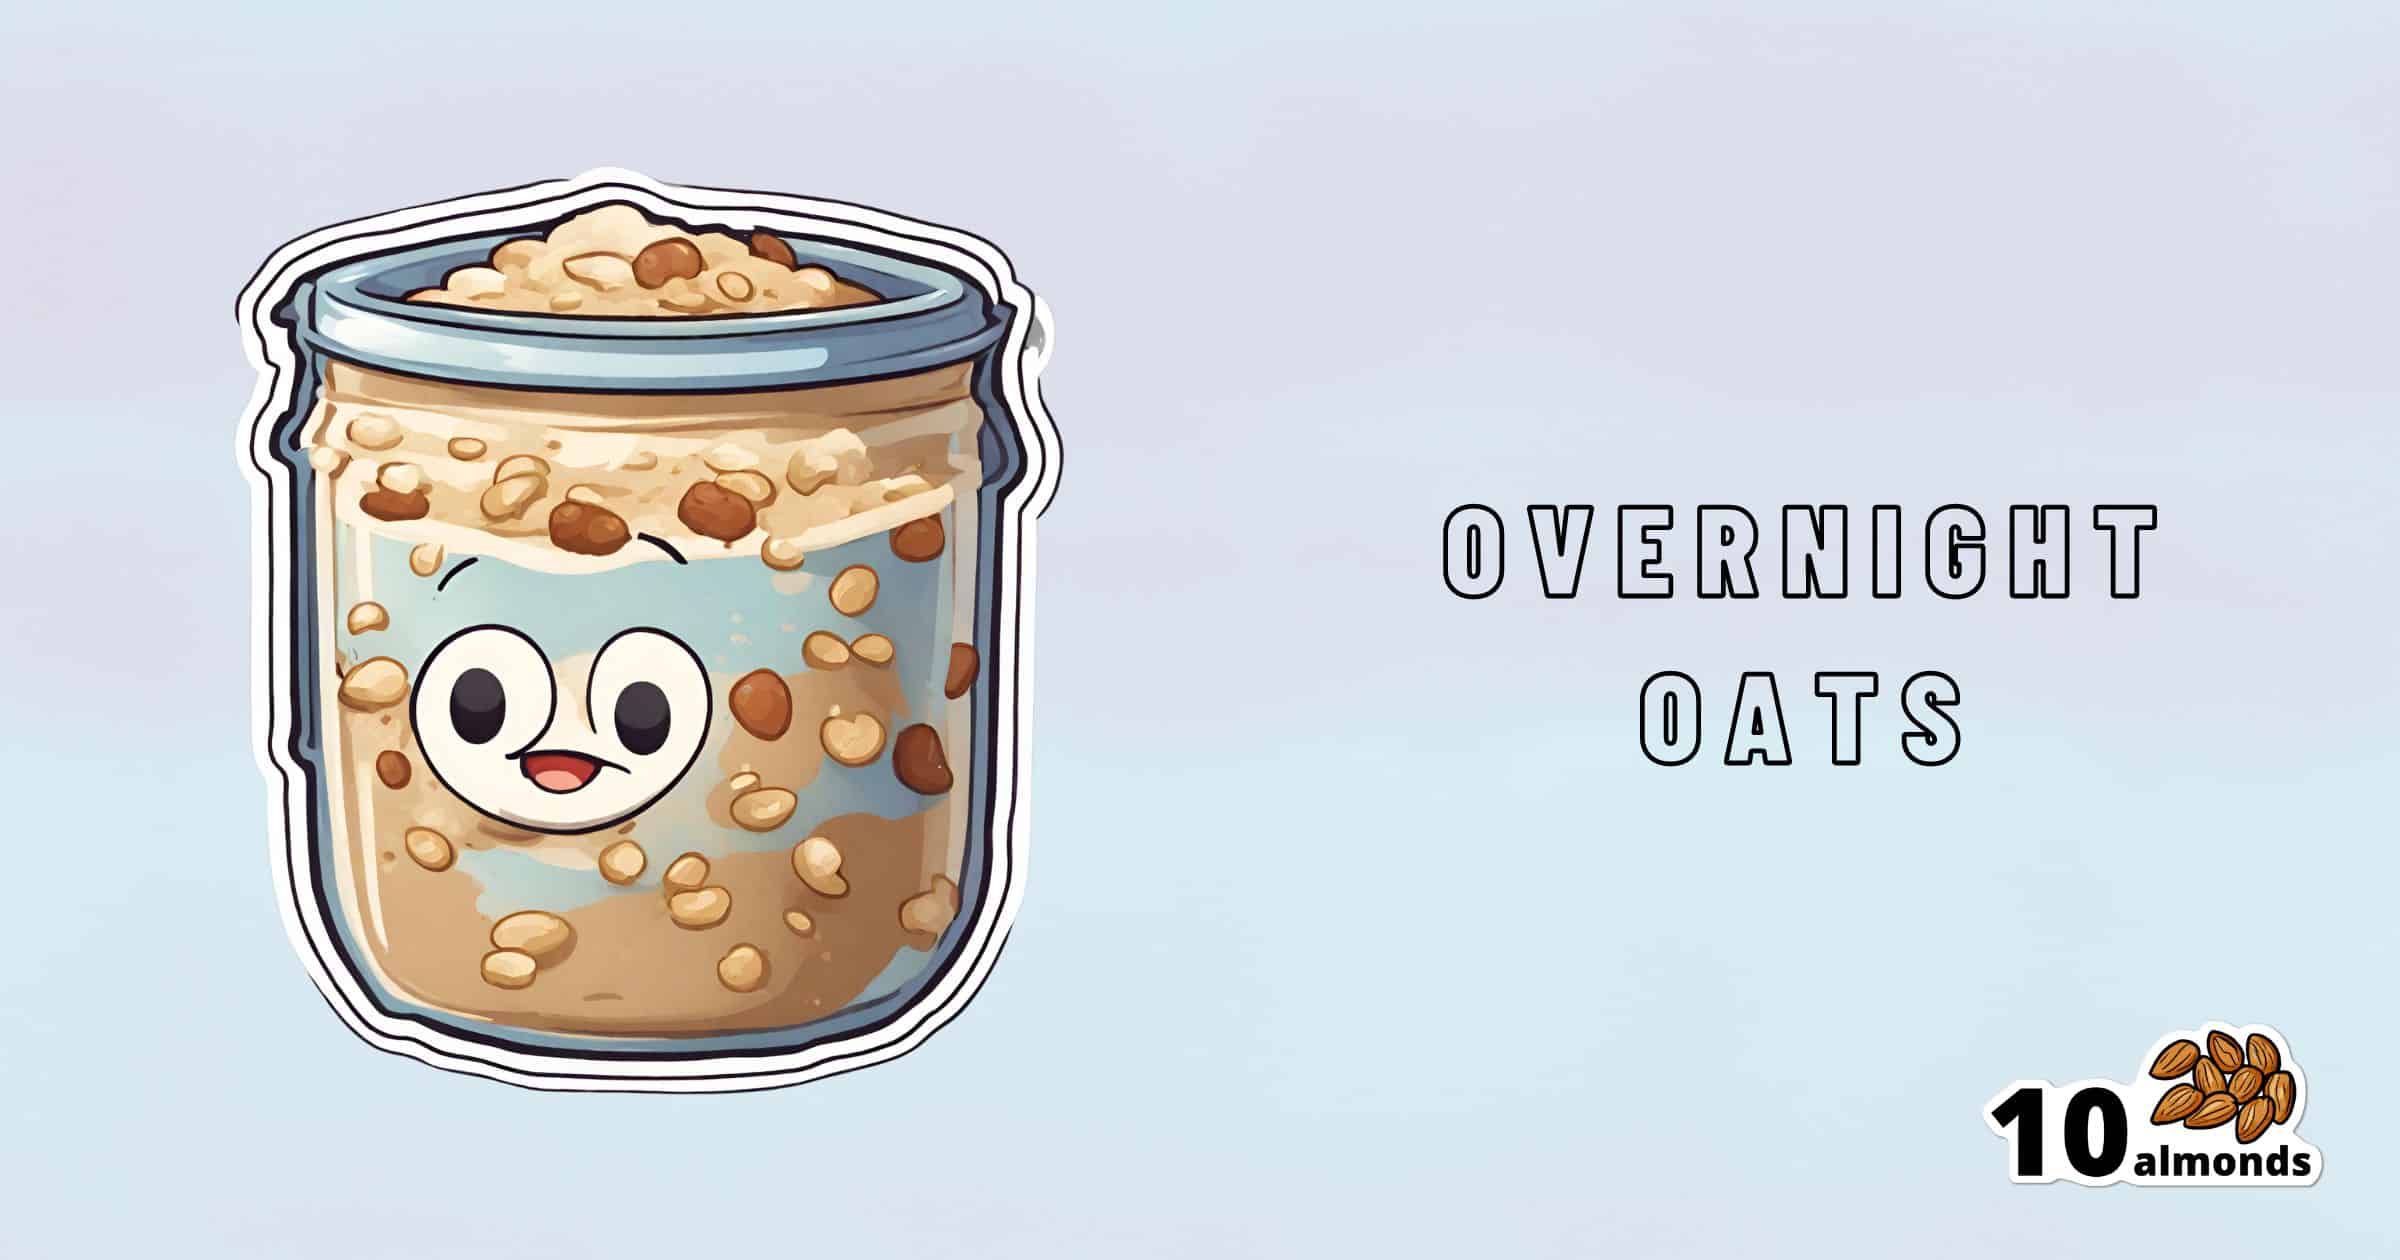 A graphic illustration of a cartoon-style jar containing overnight oats, featuring a smiling face on the oats and highlighting its benefits, set against a light blue background with the text "overnight oats" and the